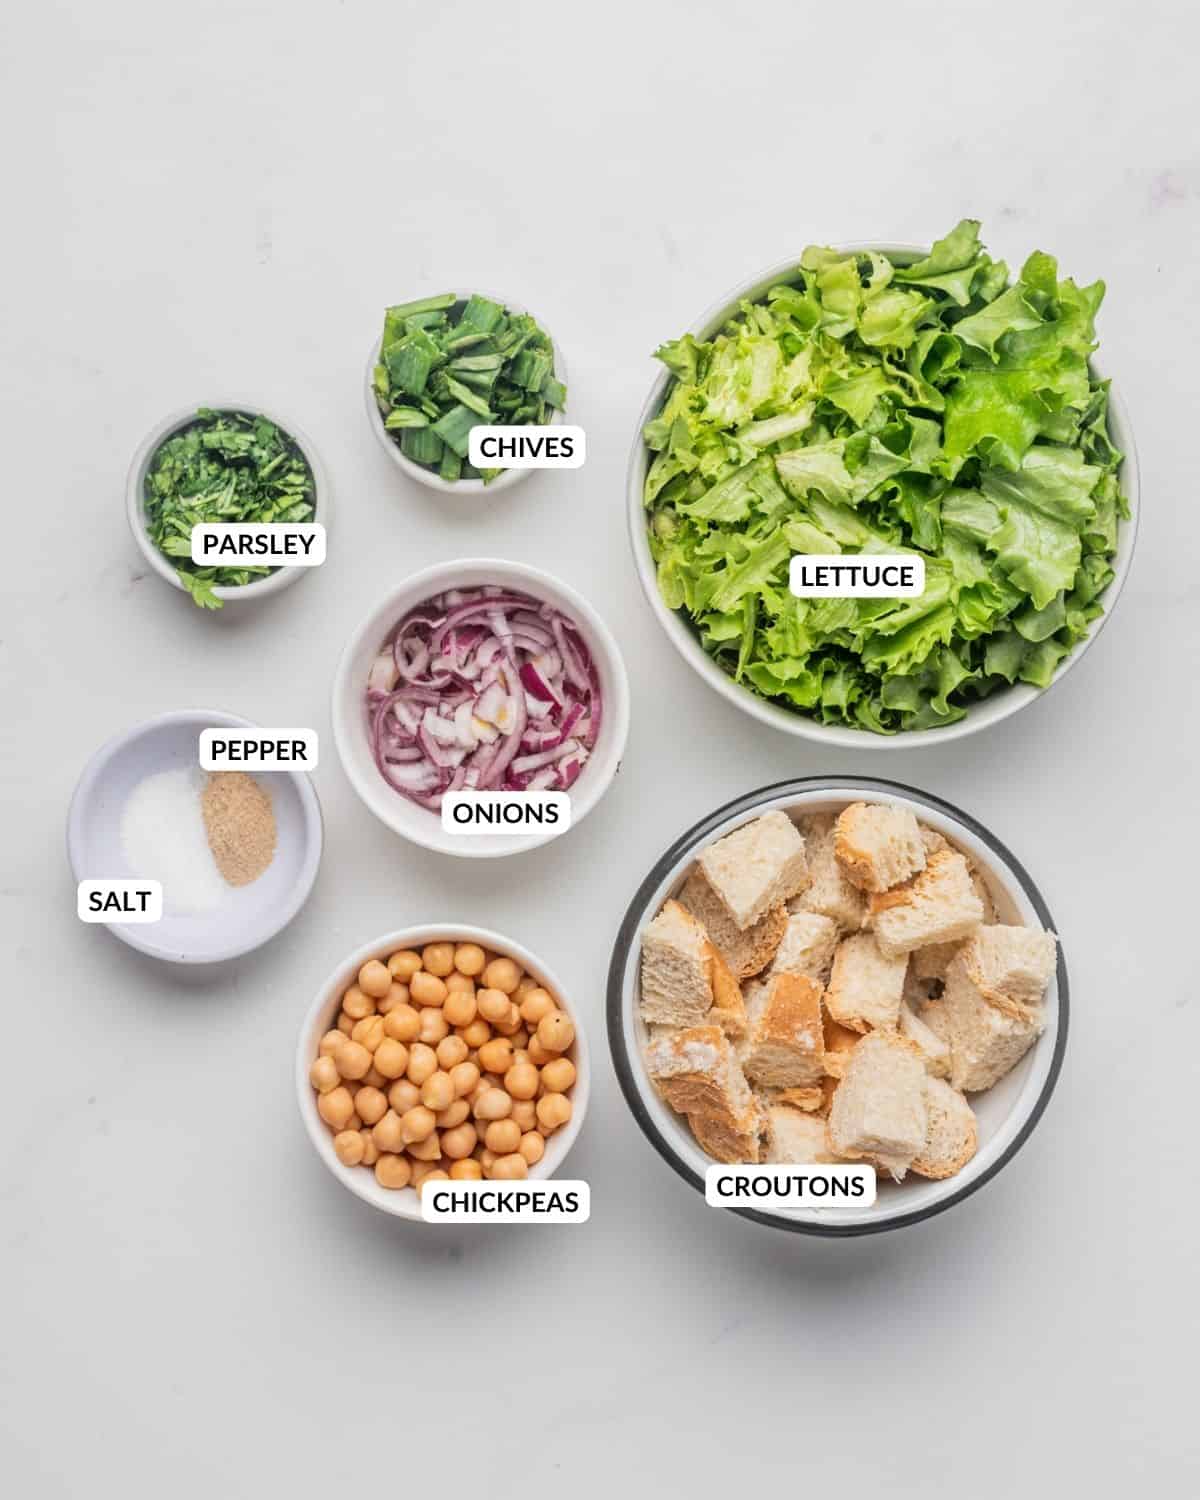 Overhead view of labeled ingredients for vegan Caesar salad - check recipe card for details.